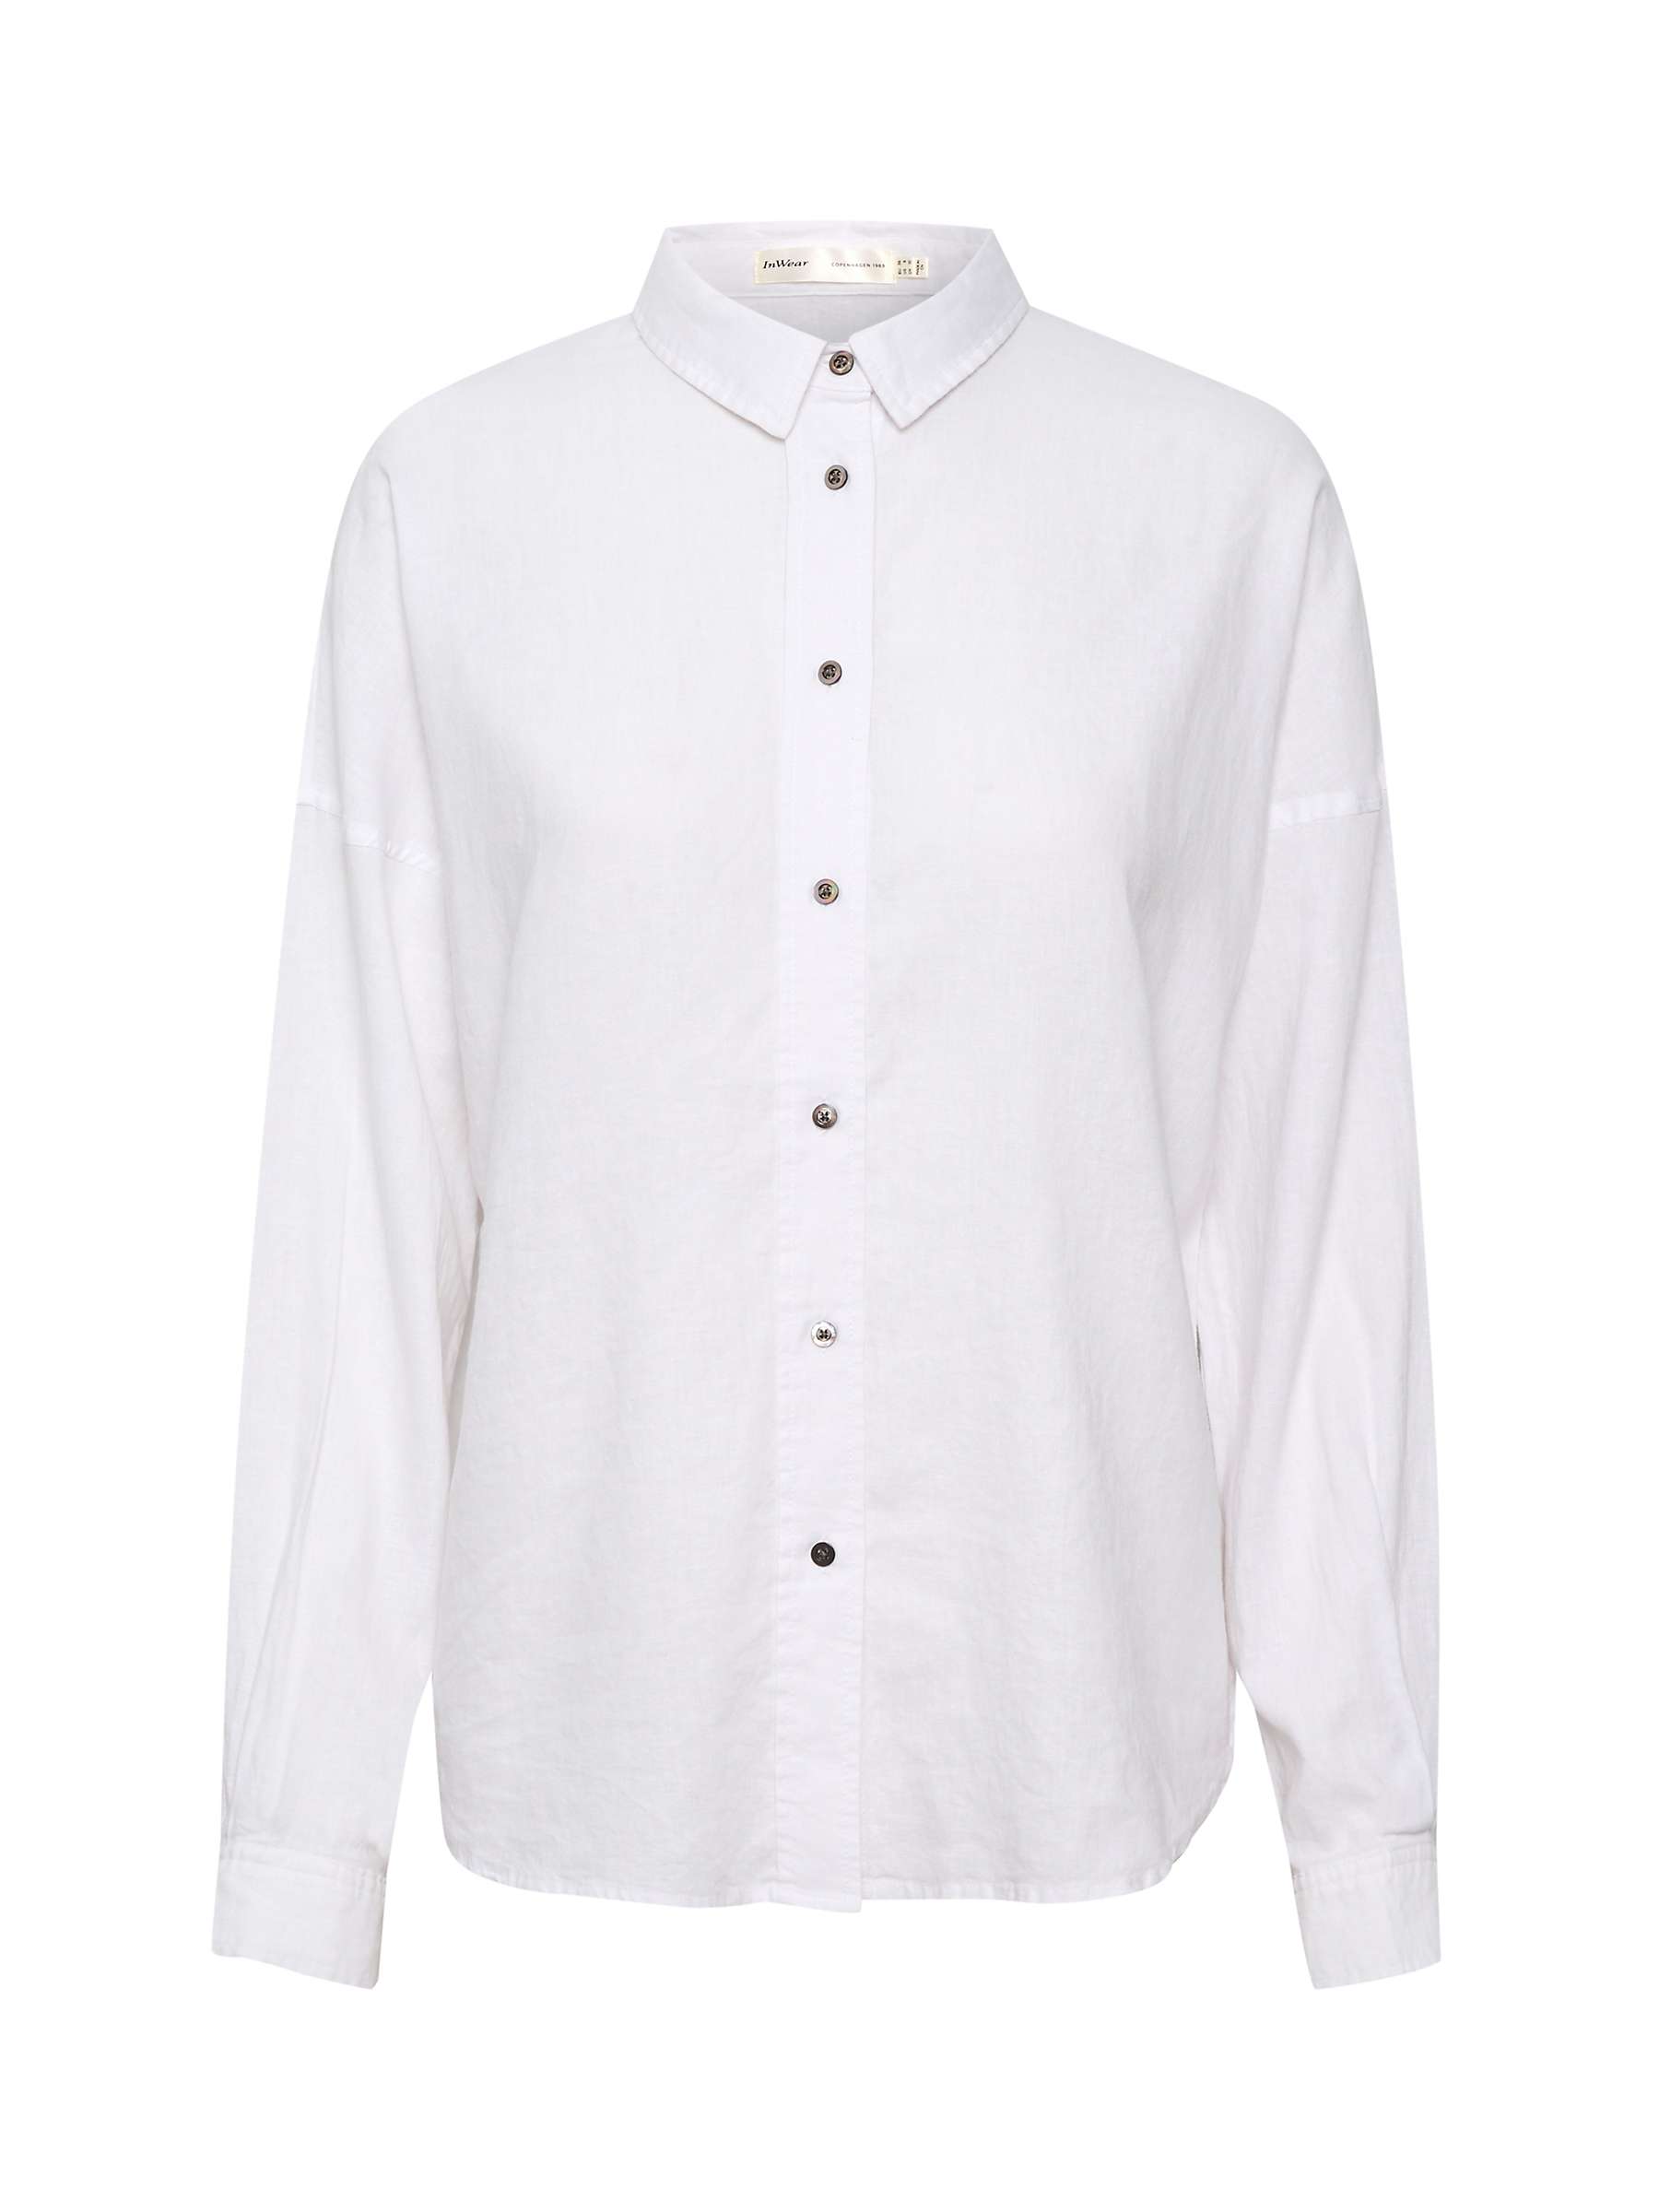 Buy InWear Amos Kiko Relaxed Fit Long Sleeve Shirt, Pure White Online at johnlewis.com